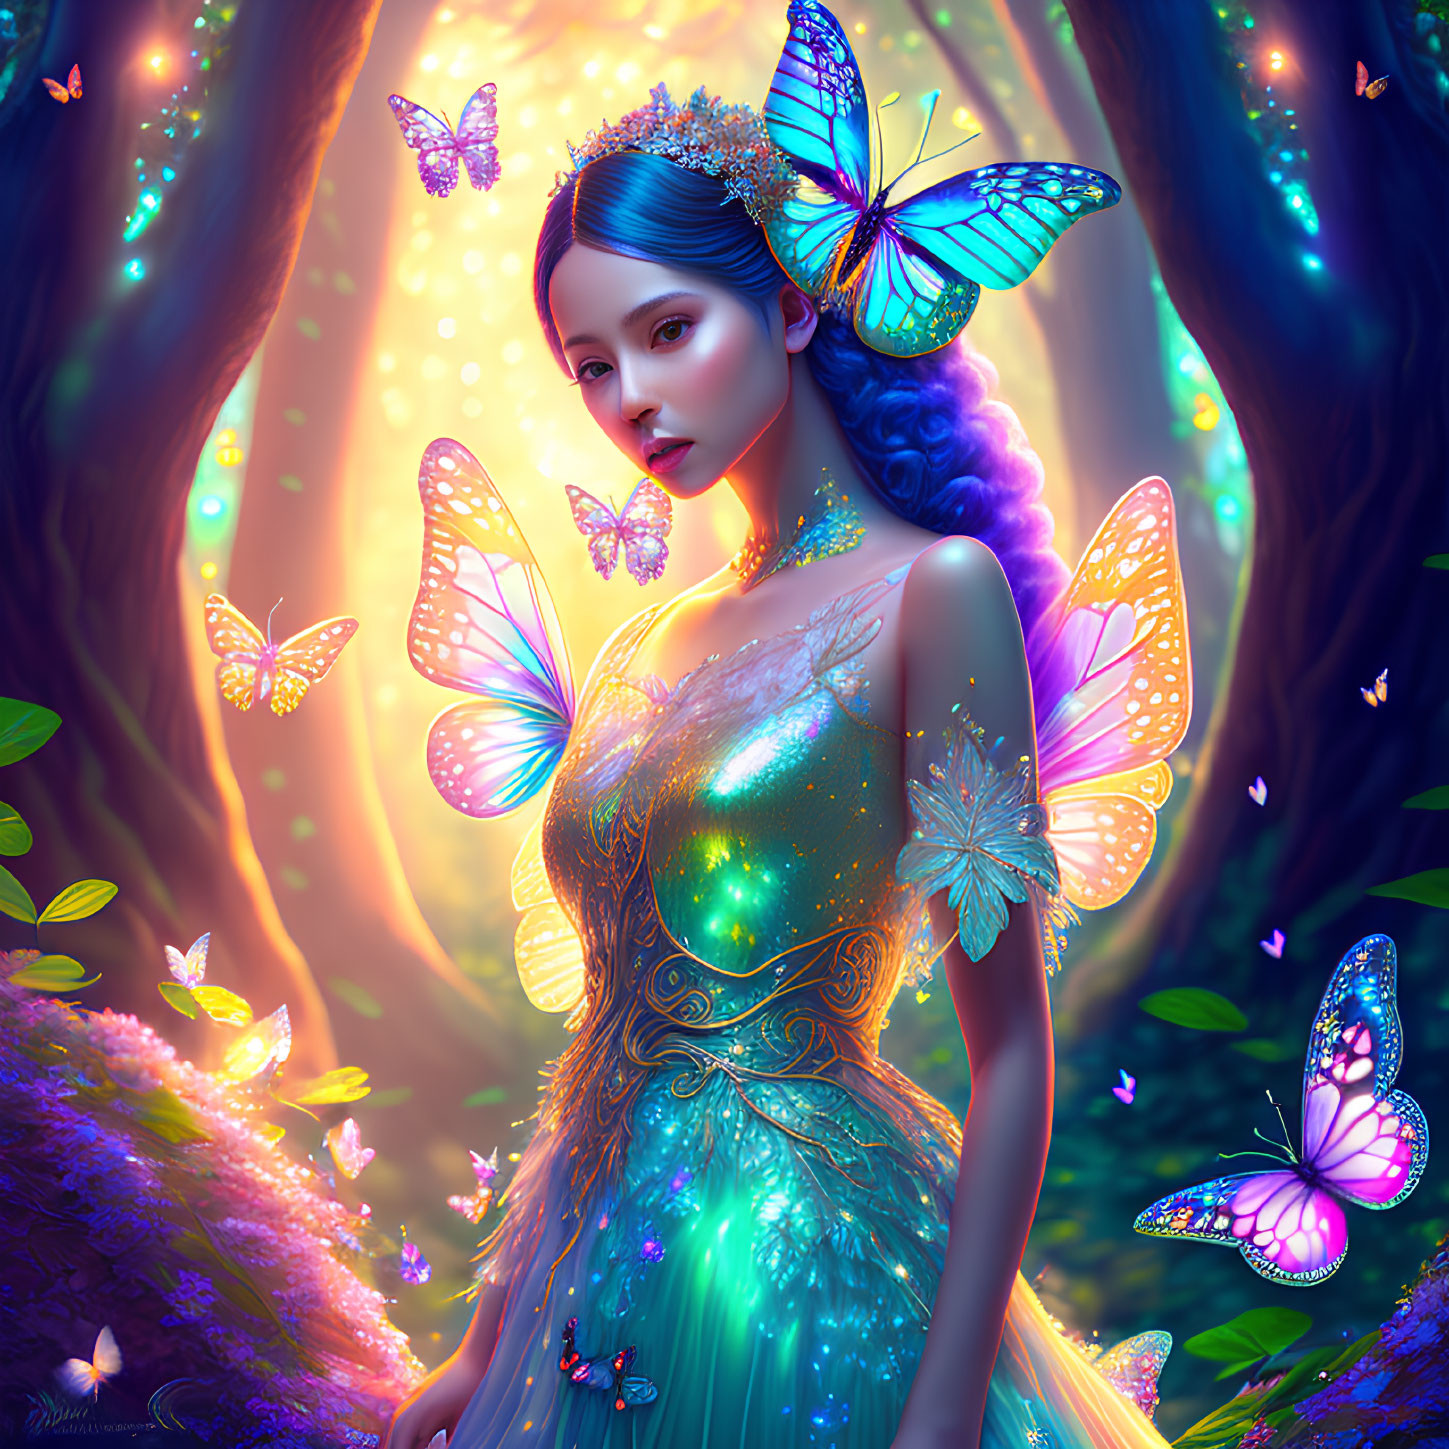 Fantasy illustration of woman with butterfly wings in glowing forest